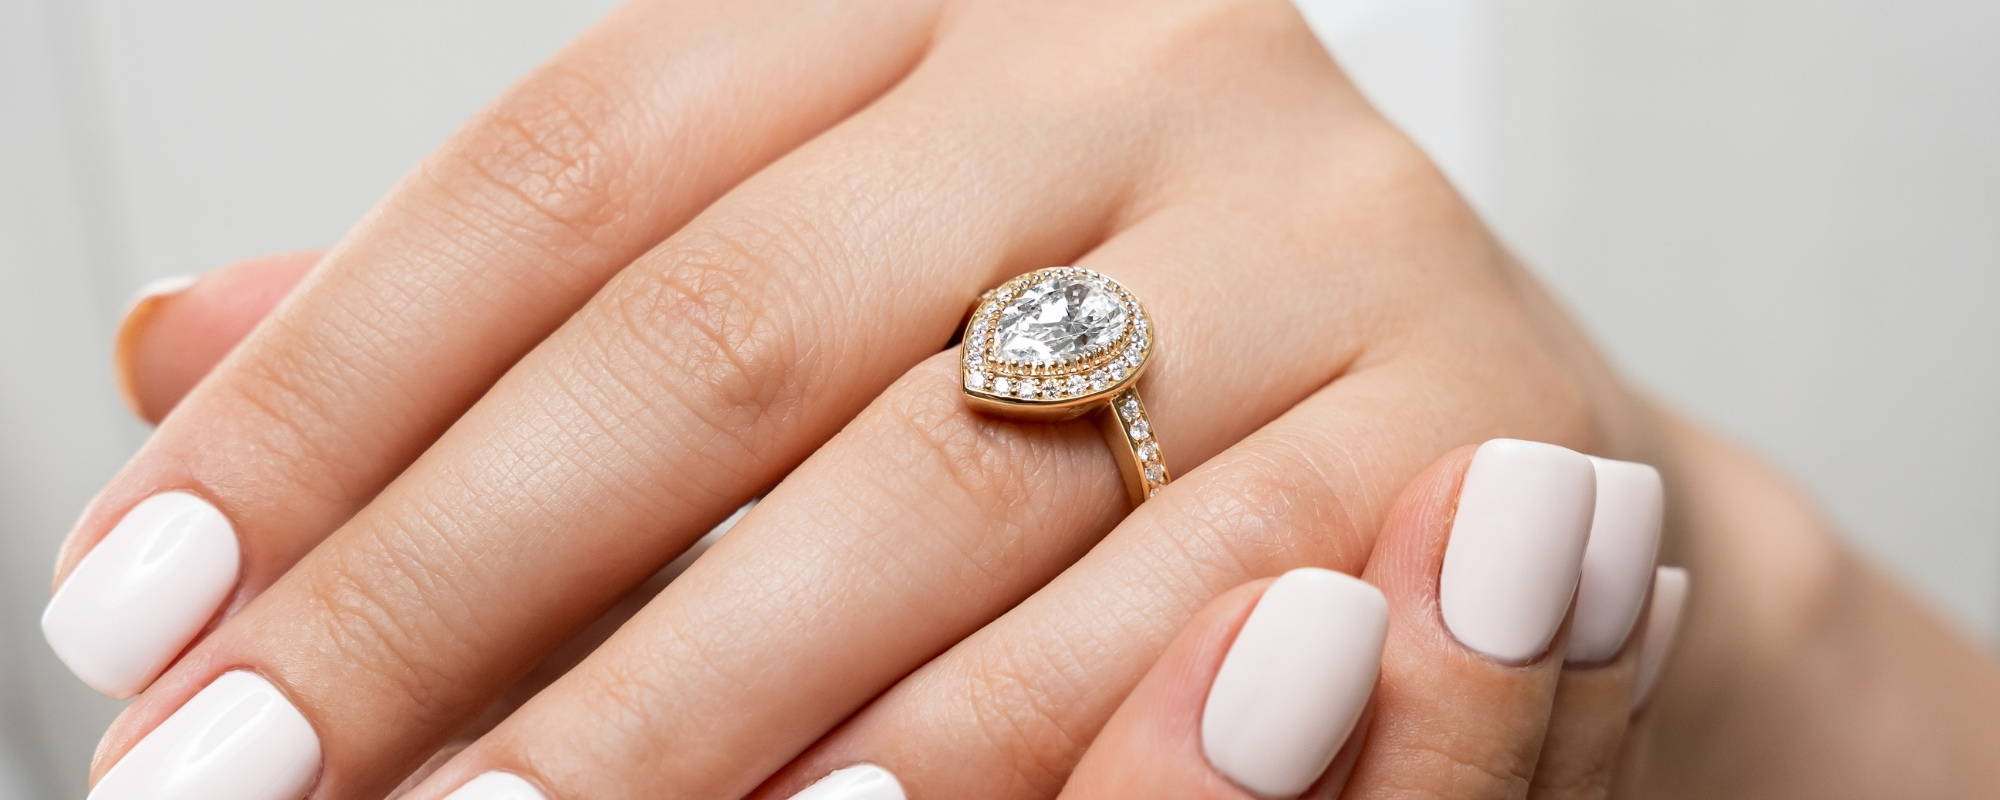 8 Most Affordable Engagement Rings That Look Expensive